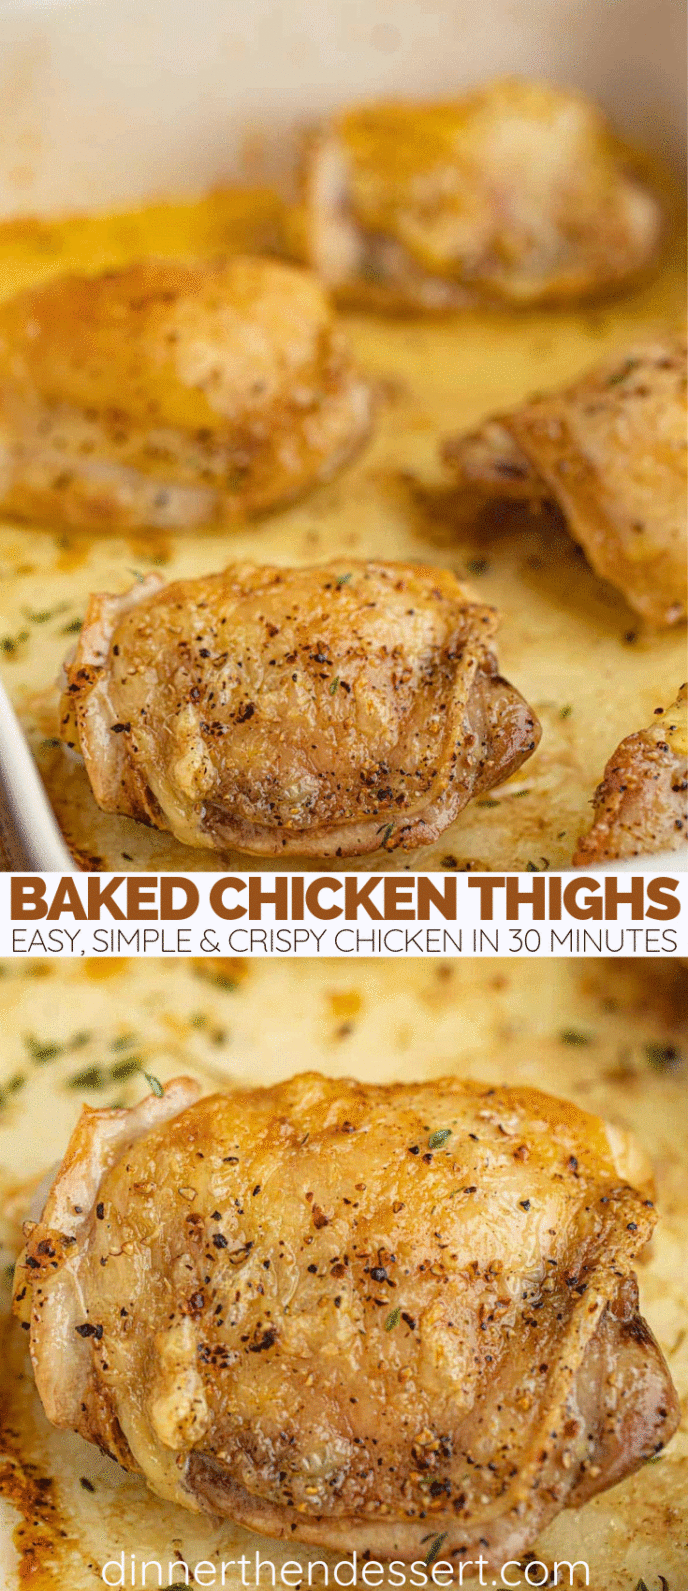 Two photos of baked crispy chicken thighs in a collage